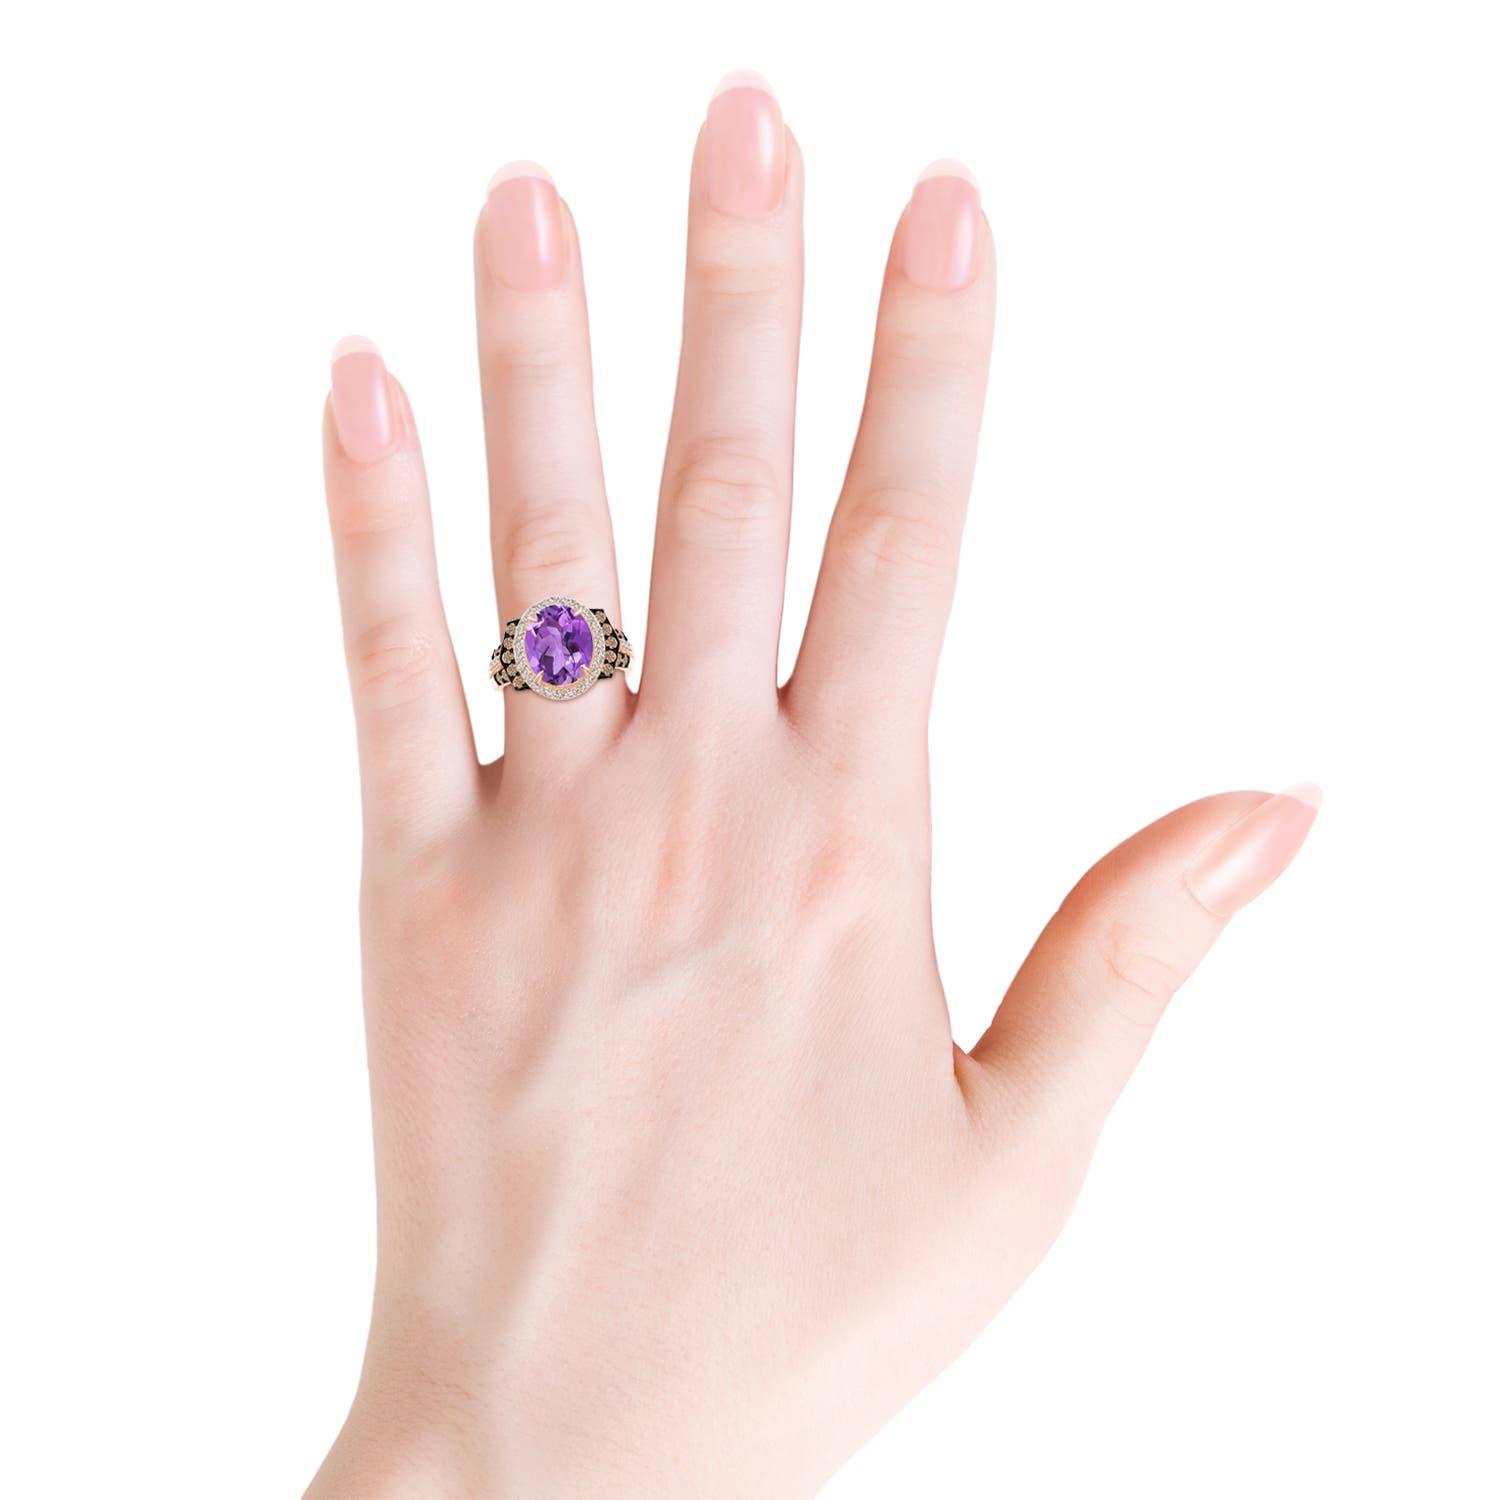 AA - Amethyst / 3.8 CT / 14 KT Rose Gold